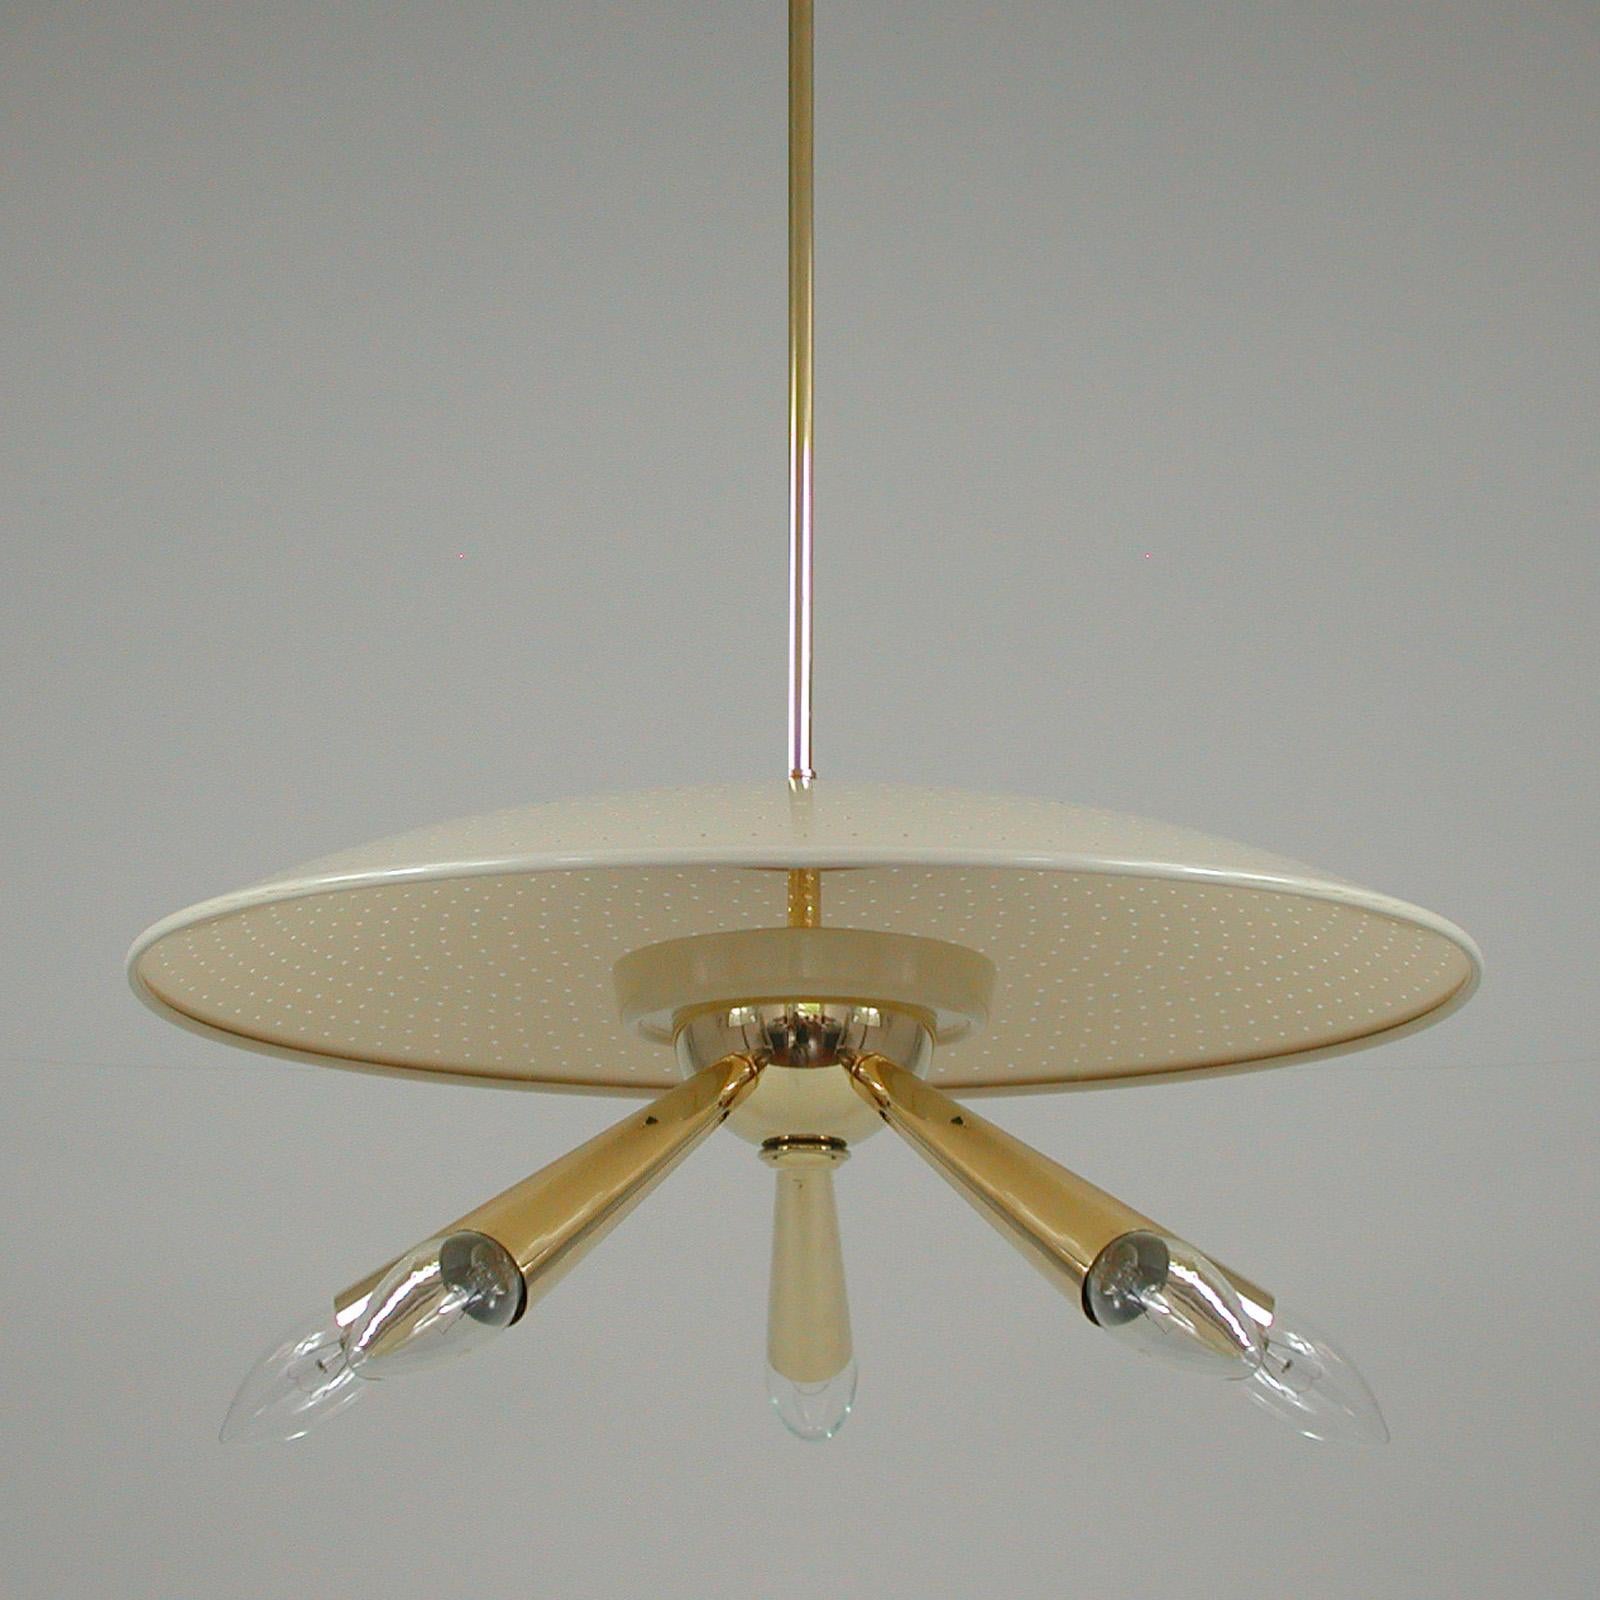 Mid-Century Modern Midcentury Brass Dome 5 Light Pendant, Italy Early 1950s For Sale